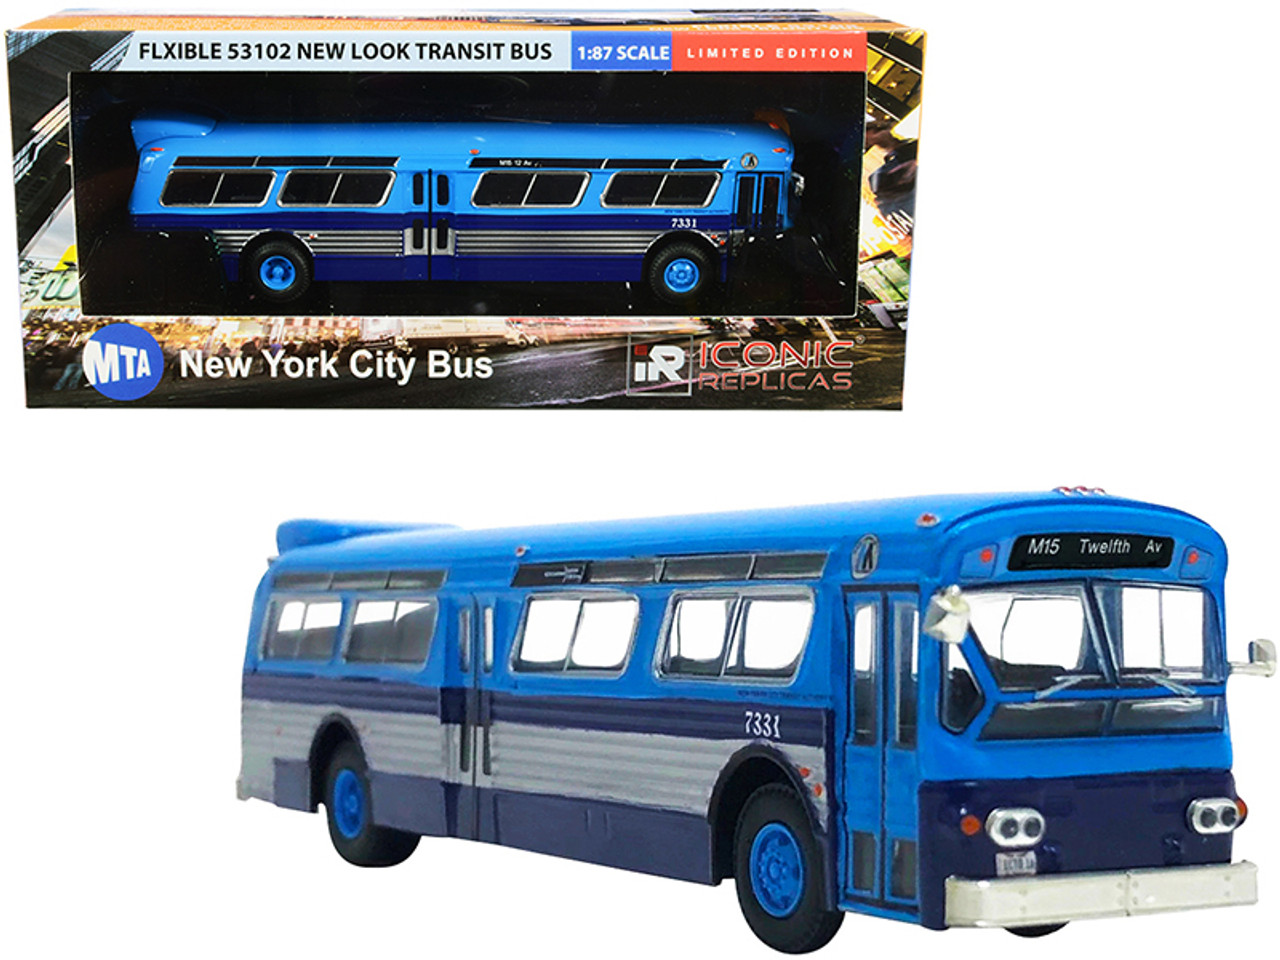 Flxible 53102 Transit Bus "Twelfth Ave." (MTA New York City) Blue and Silver 1/87 Diecast Model by Iconic Replicas